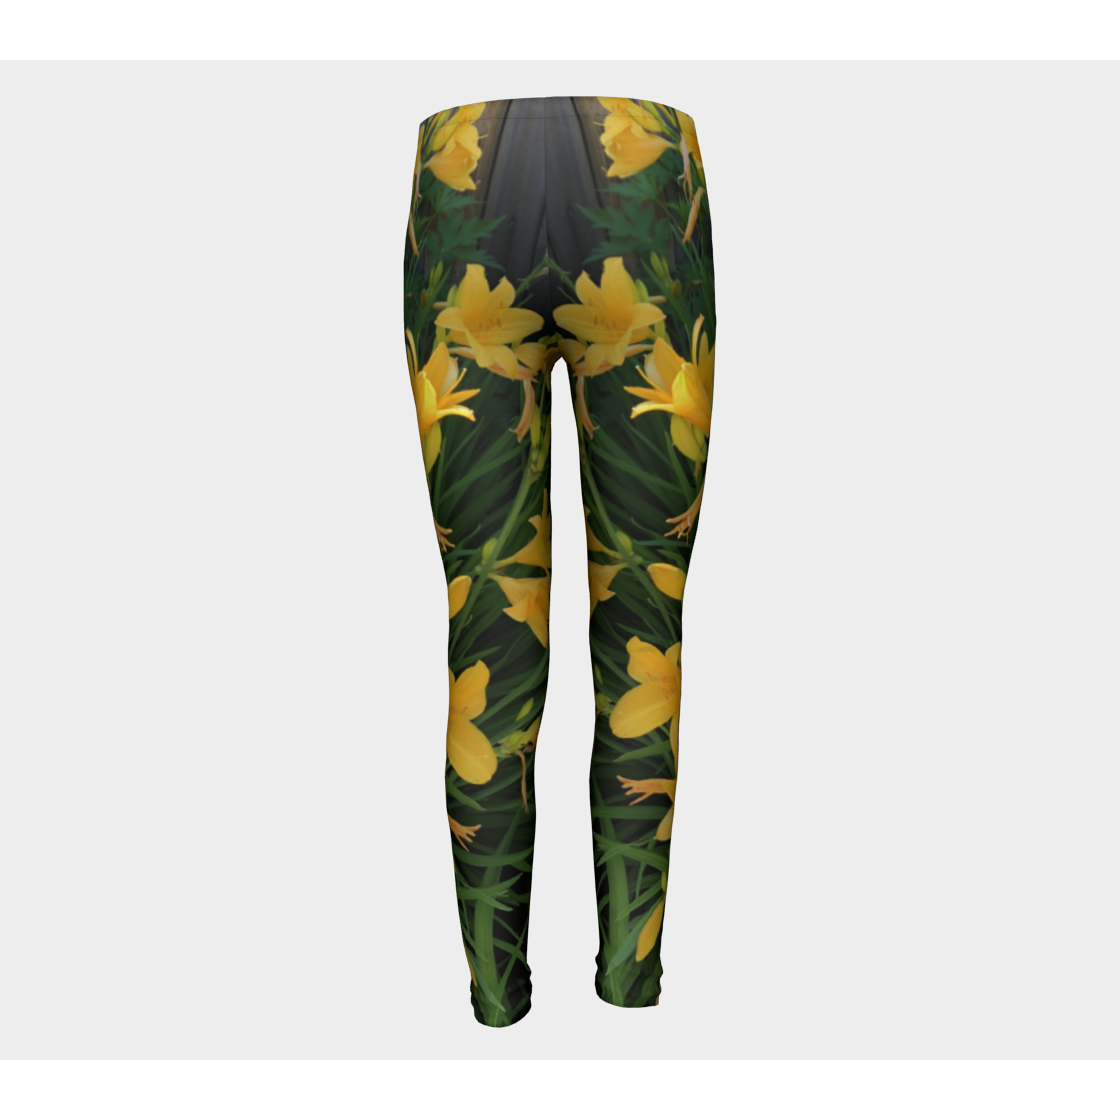 Youth Leggings for girls with: Yellow Lily Design,10-12 years, Back